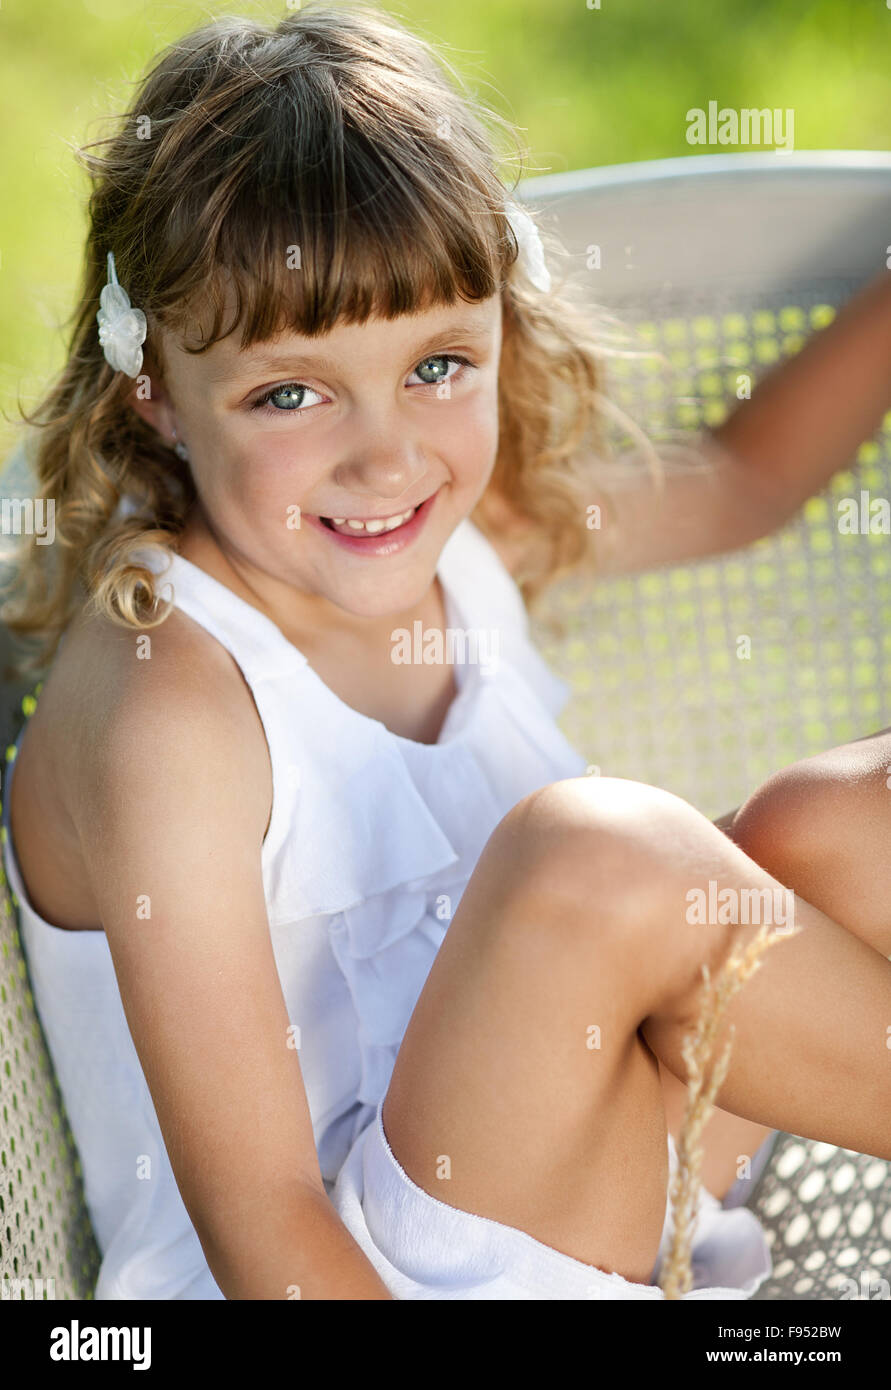 Cute little girl is enjoying leisure time with in green sunny park Stock Photo